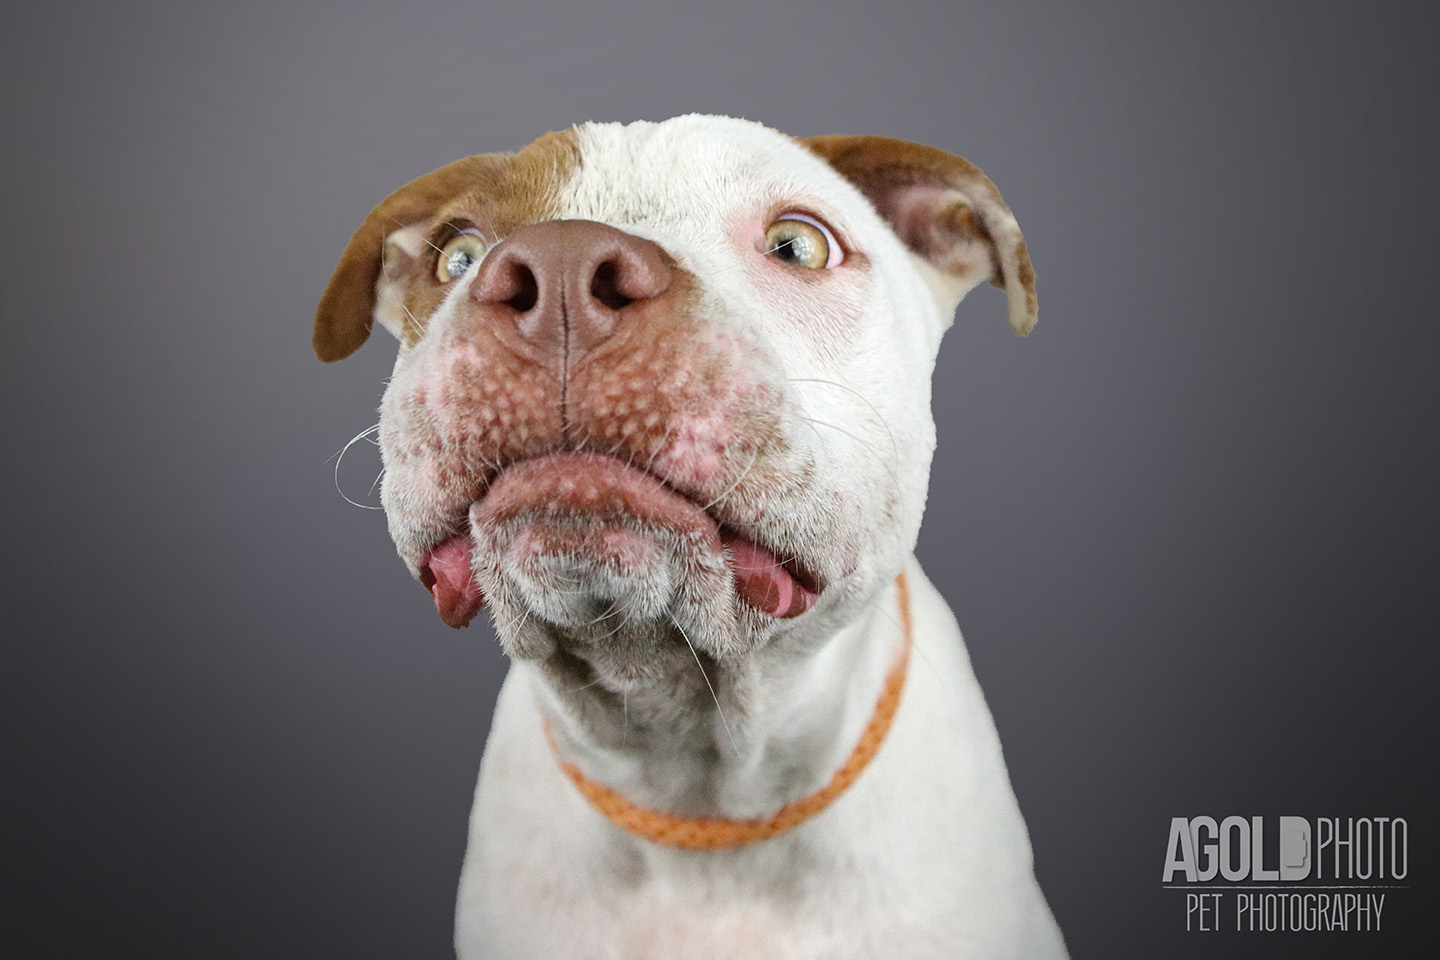 susie-q-1_agoldphoto-tampa-pet-photography__agoldphoto-tampa-pet-photography_